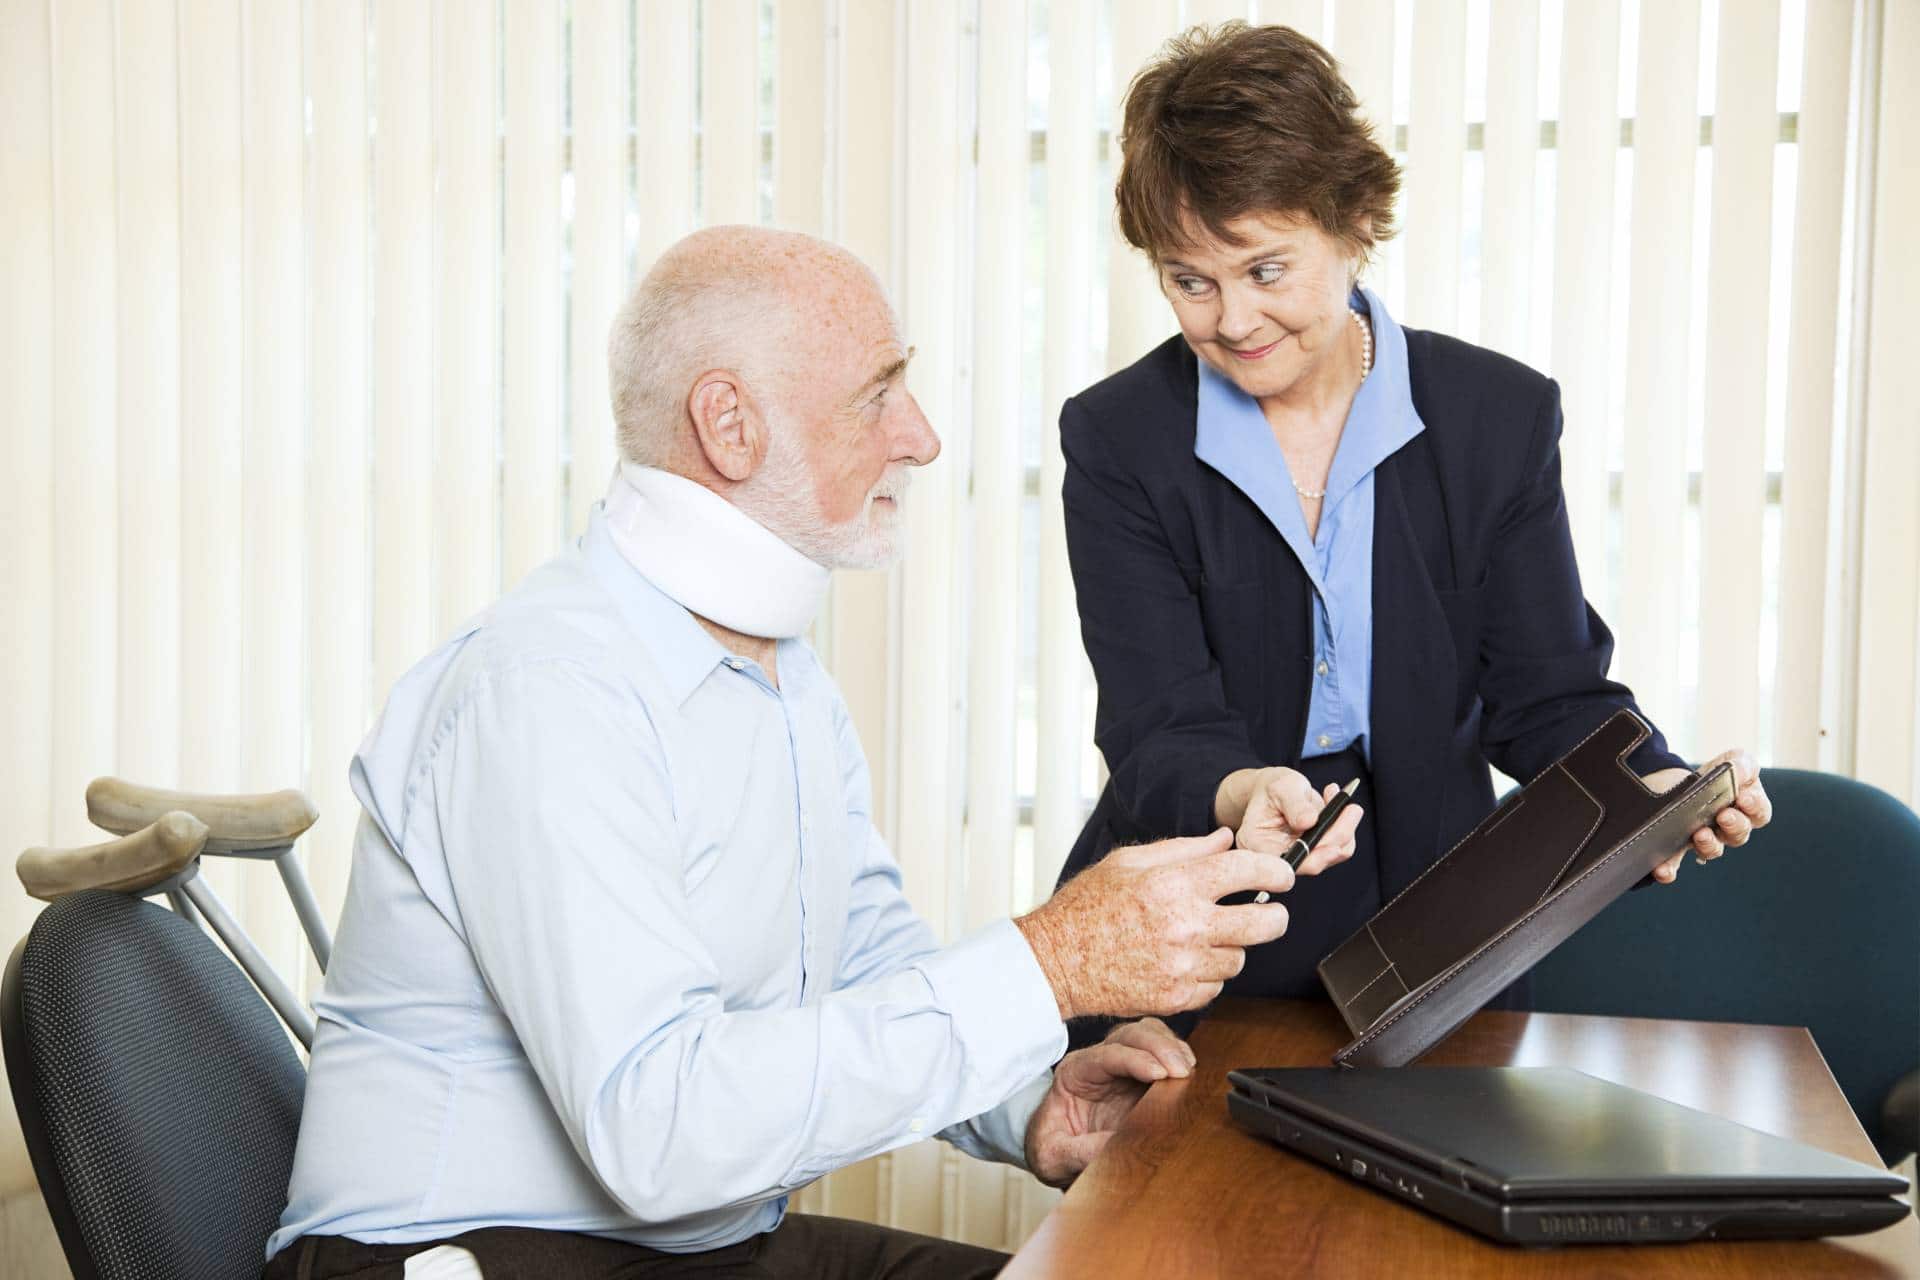 Schedule a free consultation with our personal injury lawyers at the Angell Law Firm.